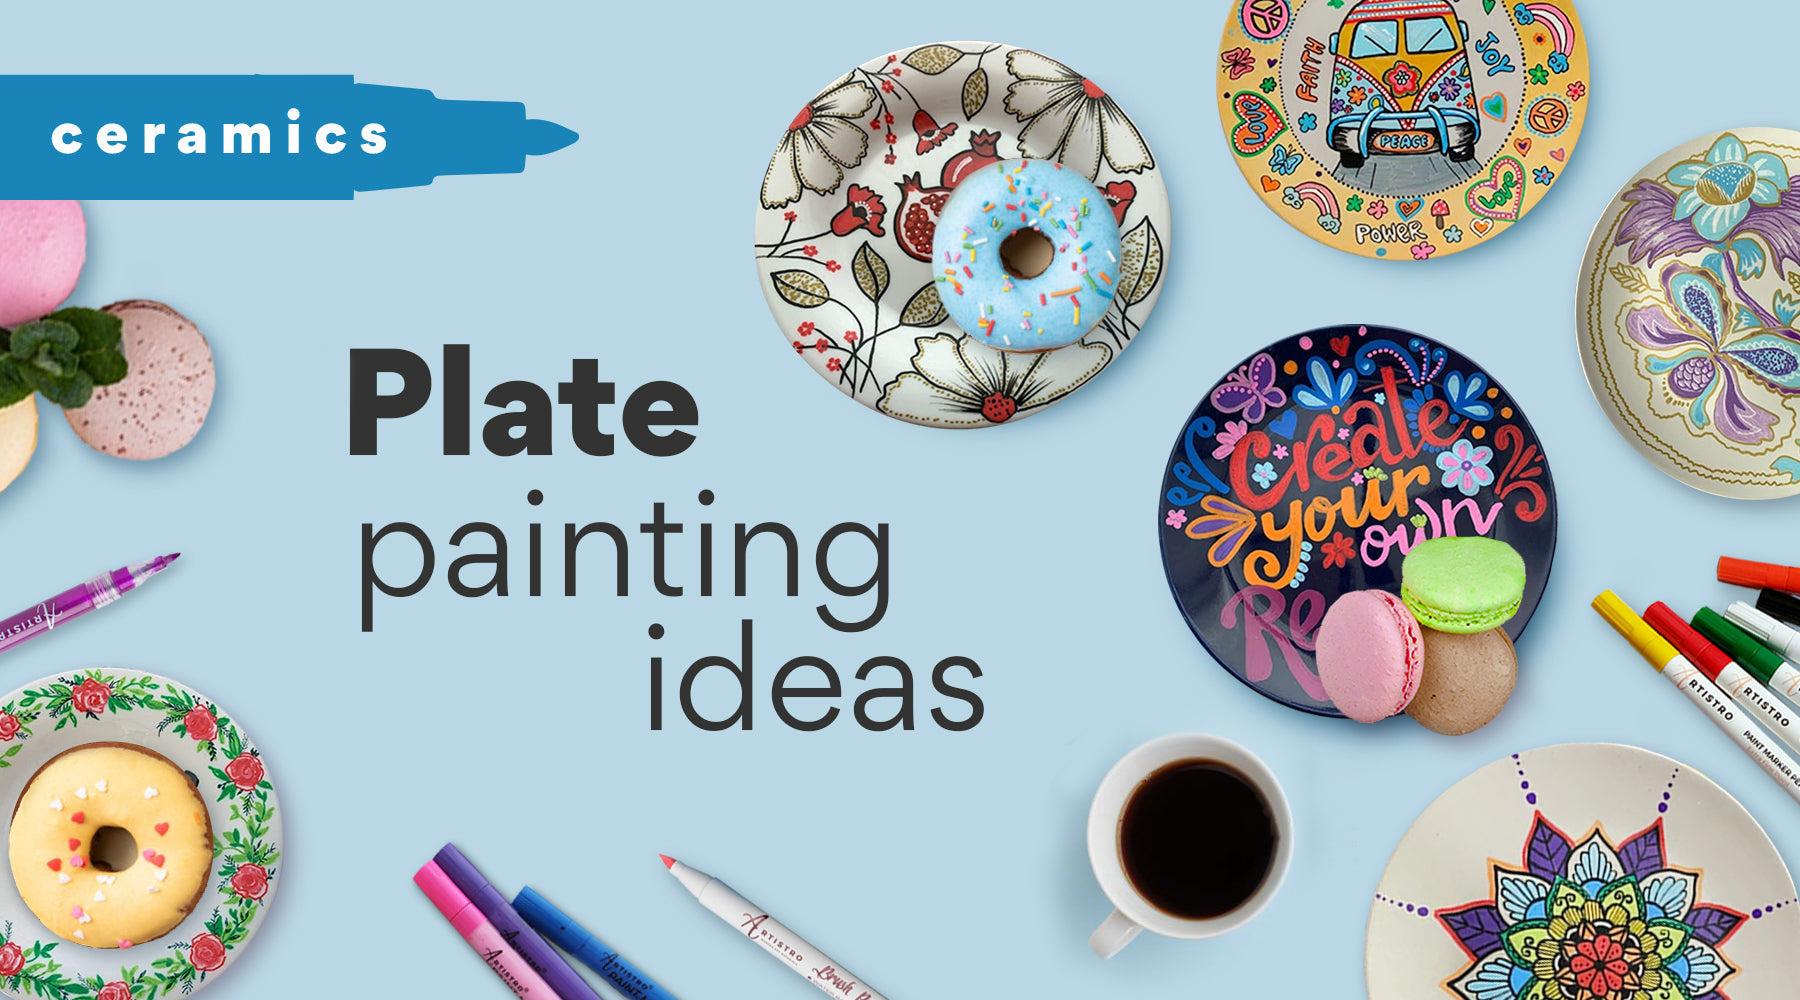 The Best Plate Painting Ideas: 50 plate painting designs from Artistro